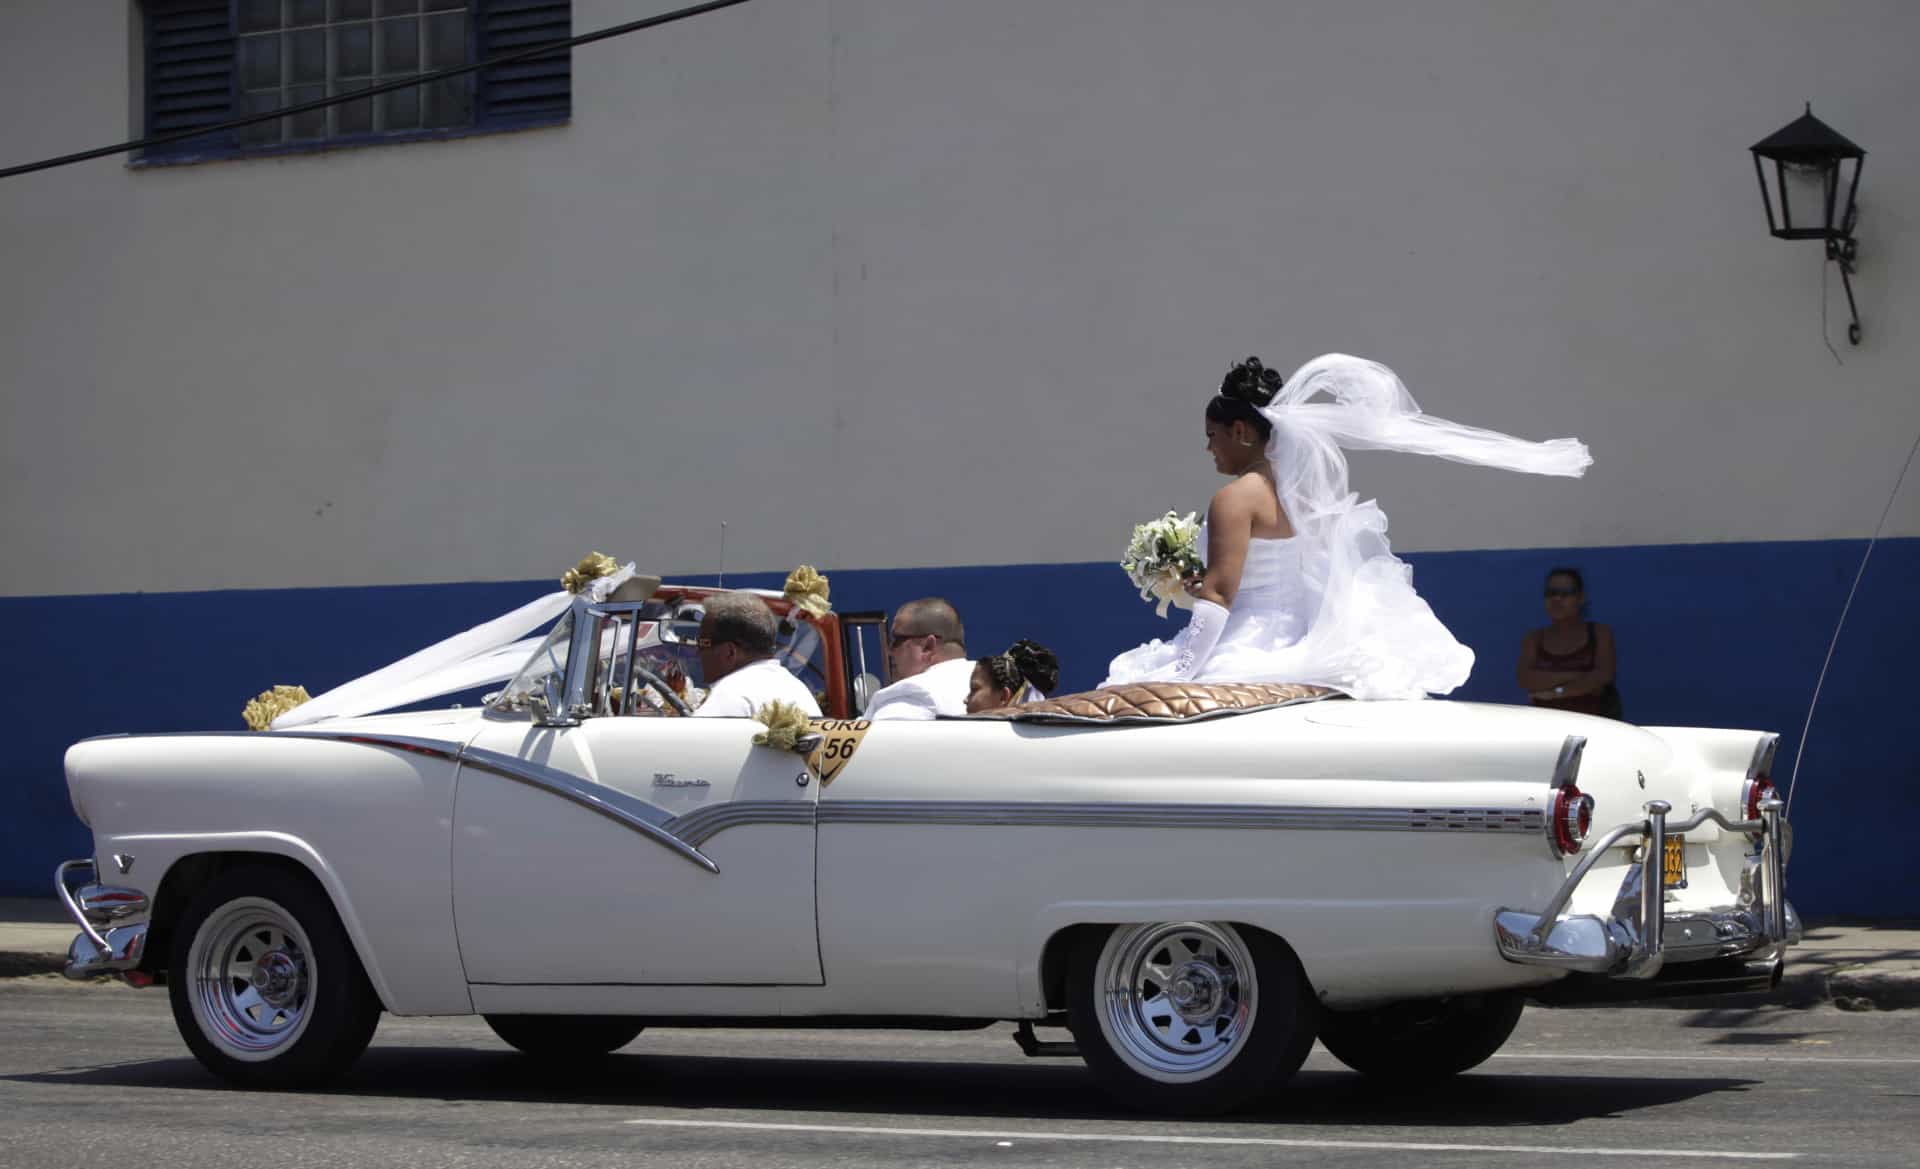 And used to transport brides to wedding ceremonies.